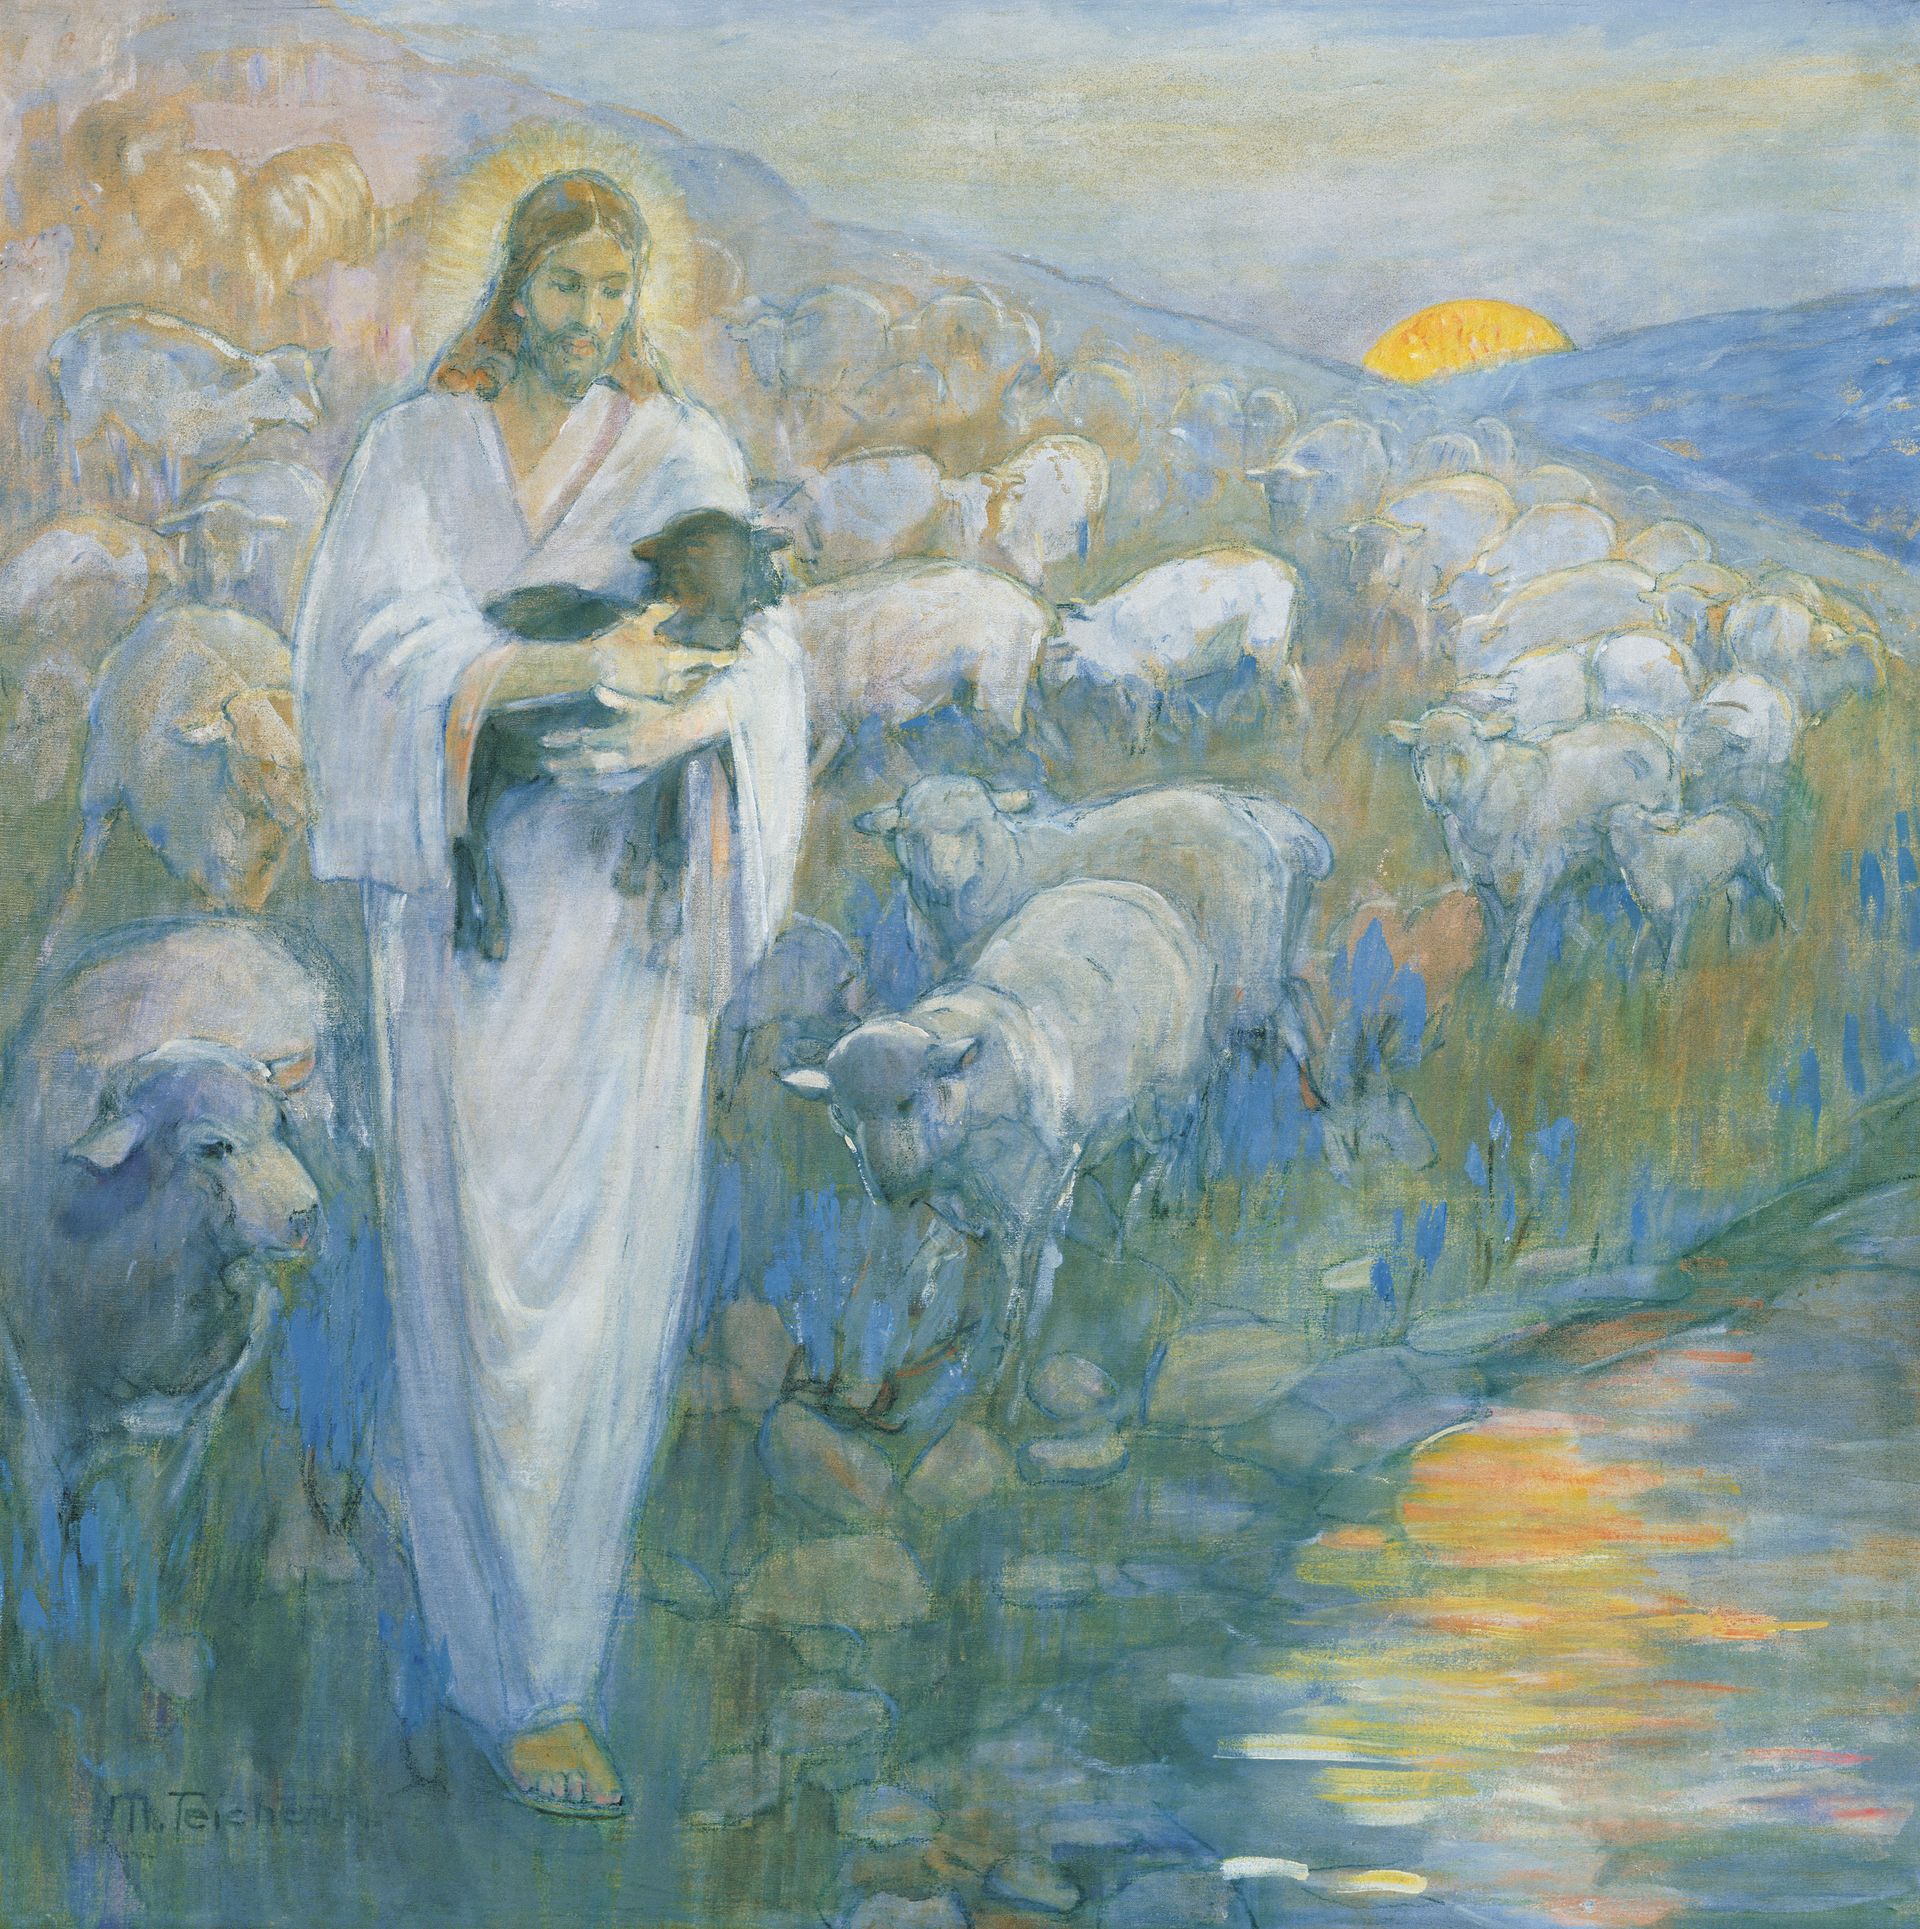 (Christ) Rescue of the Lost Lamb, by Minerva K. Teichert